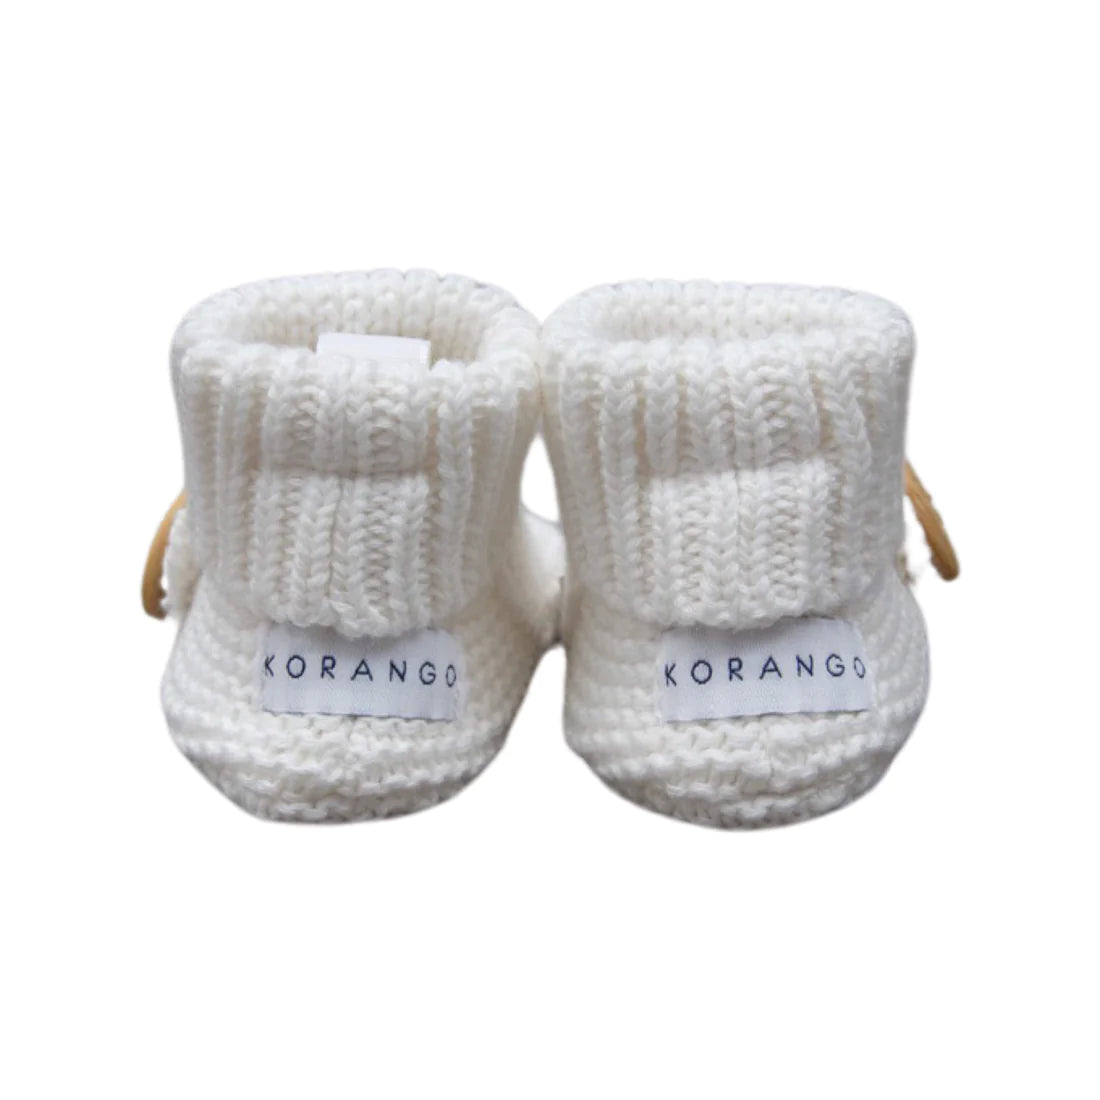 Cotton Knit Bootie with Gift Box - White